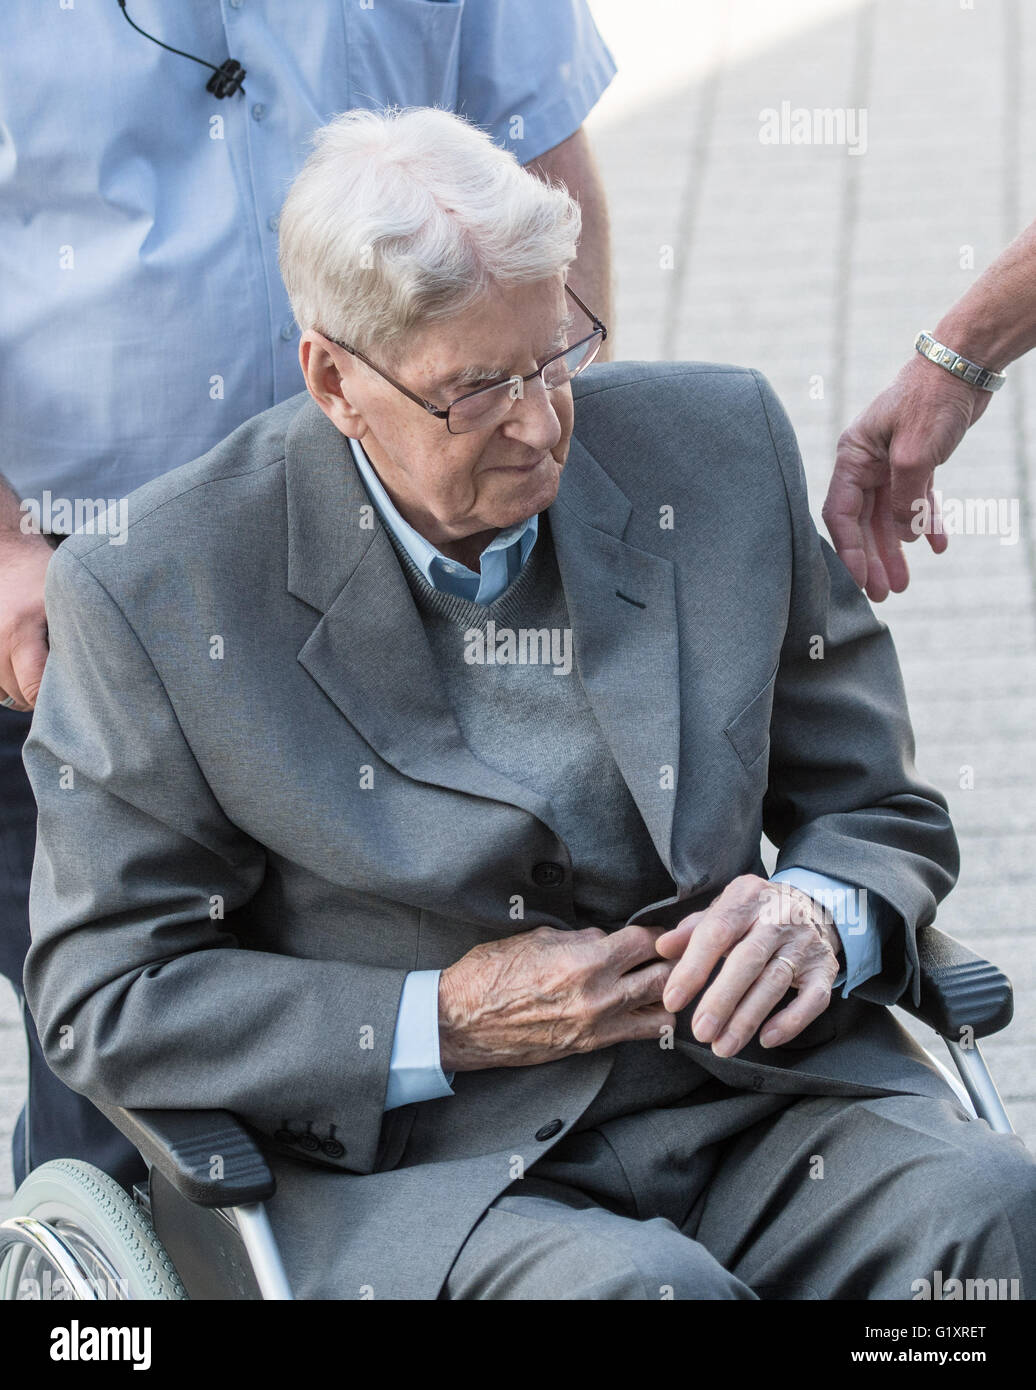 Detmold, Germany. 20th May, 2016. Defendant Reinhold Hanning arrives for a session of the trial against him, in Detmold, Germany, 20 May 2016. The 94-year-old World War II SS guard is facing a charge of being an accessory to at least 170,000 murders at Auschwitz concentration camp. Prosecutors state that he was a member of the SS 'Totenkopf' (Death's Head) Division and that he was stationed at the Nazi regime's death camp between early 1943 and June 1944. Photo: BERND THISSEN/dpa/Alamy Live News Stock Photo